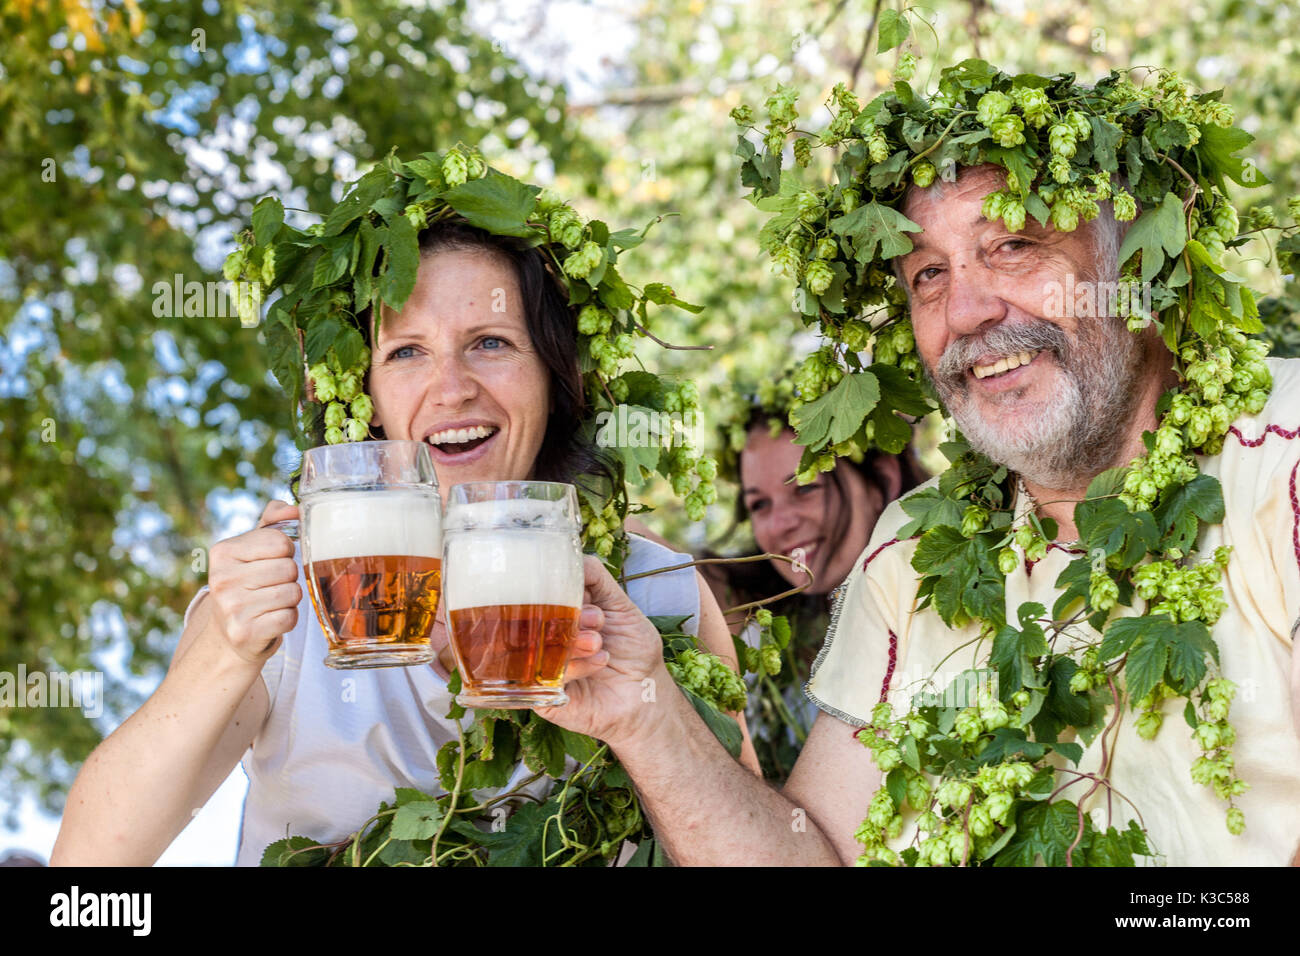 Czech beer festival people drinking beer Czech Republic beer plants people decorated with a hop wreath Man and woman Stock Photo